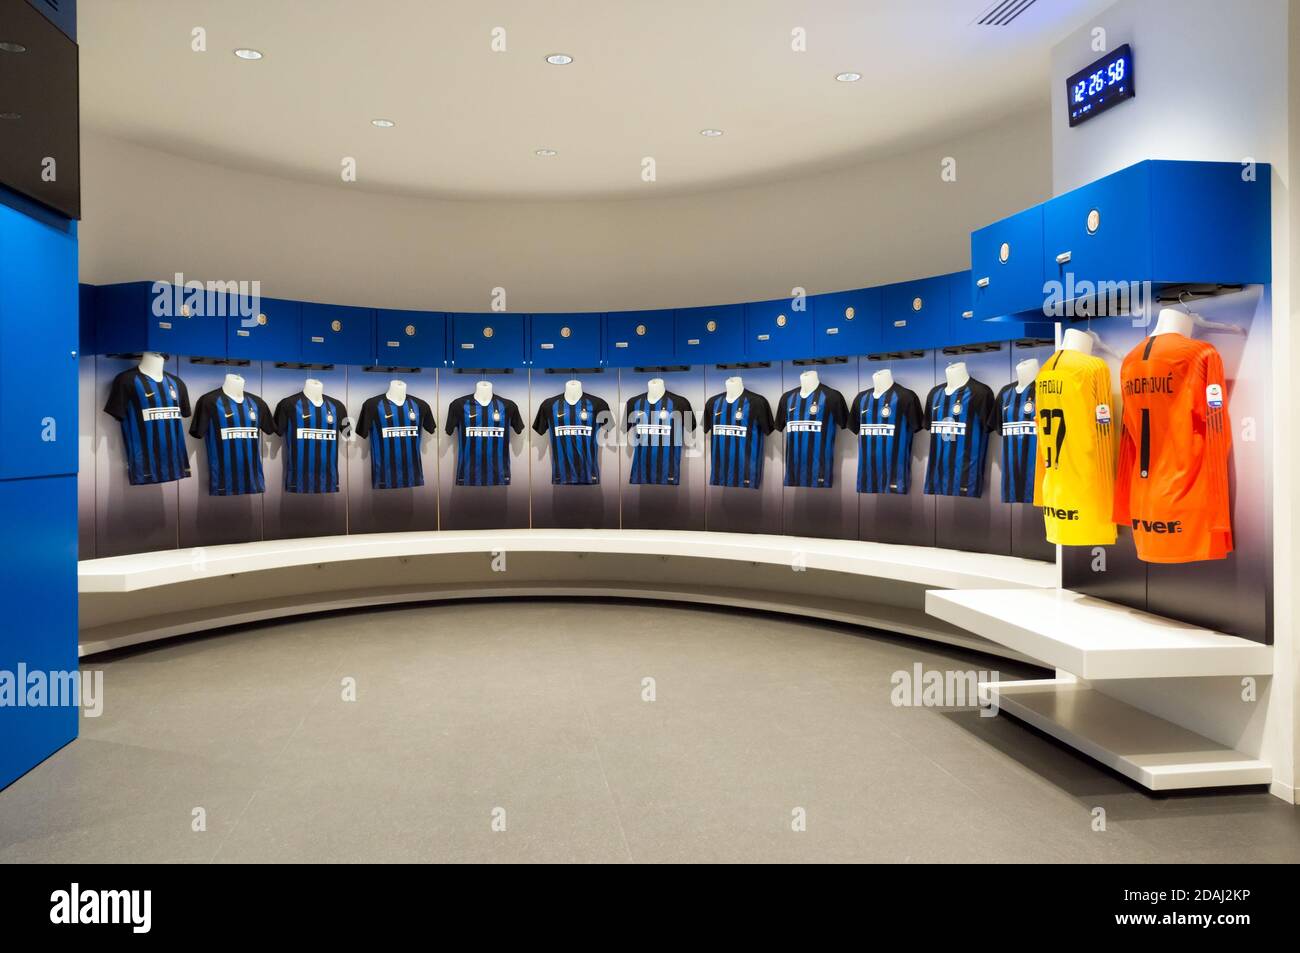 Seats for a team of football players with a blue uniform on top in the  locker